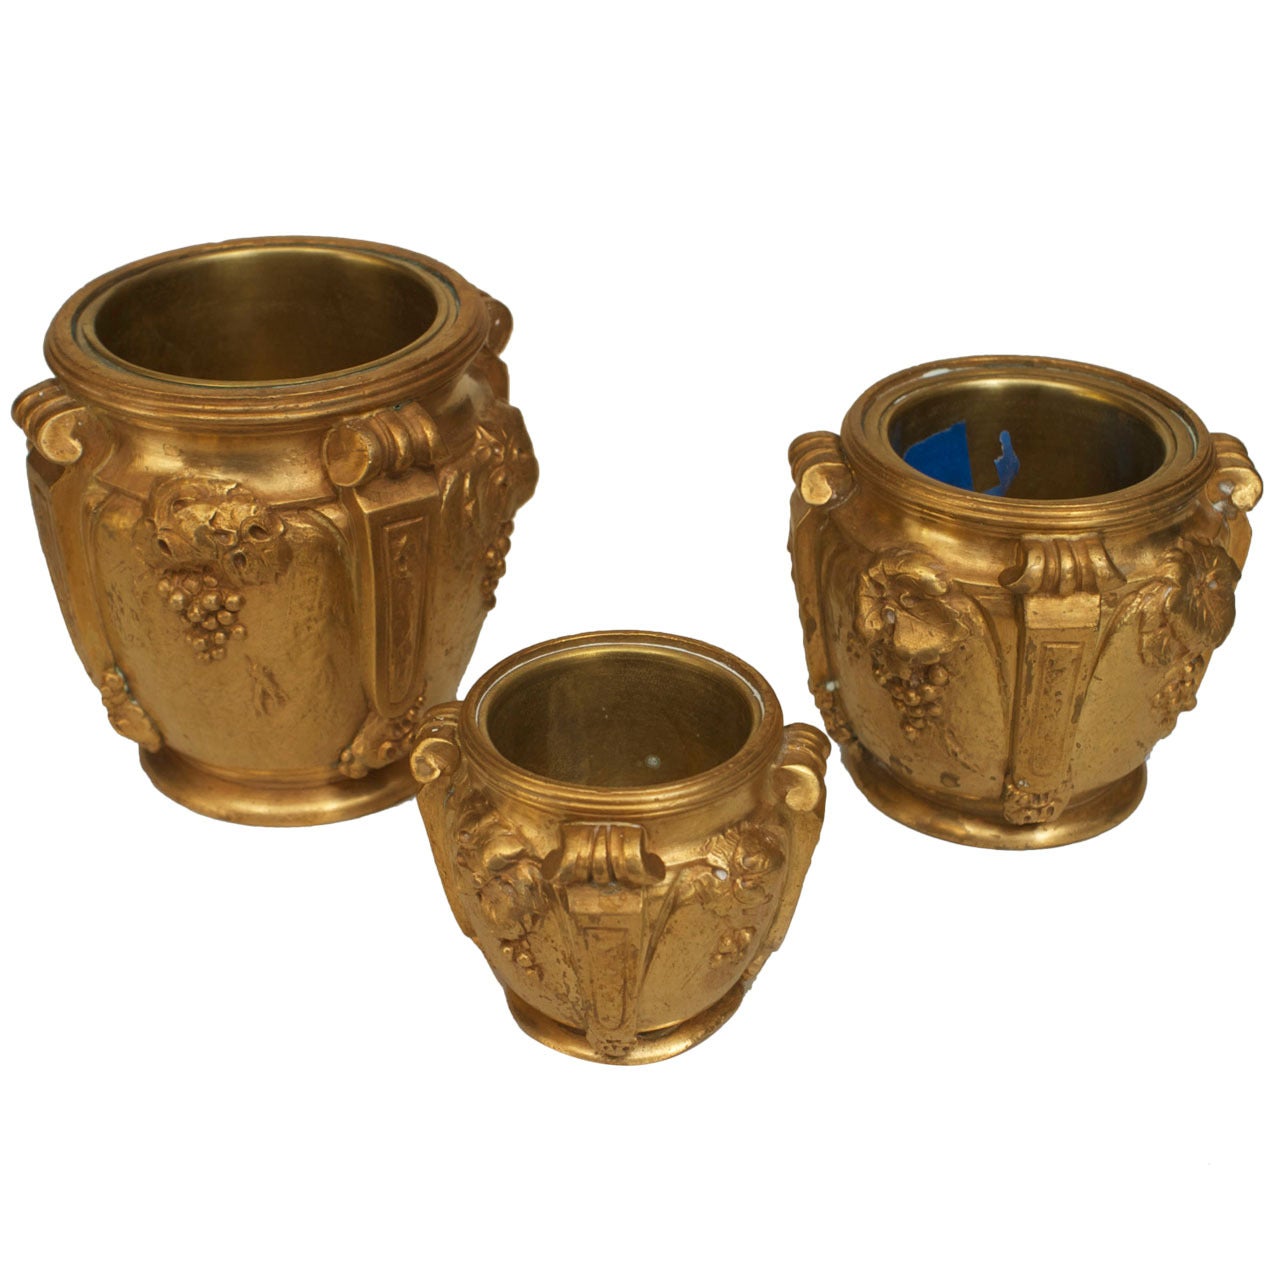 Set of 3 Small French Art Nouveau Gilt Bronze Vases by Marionnet